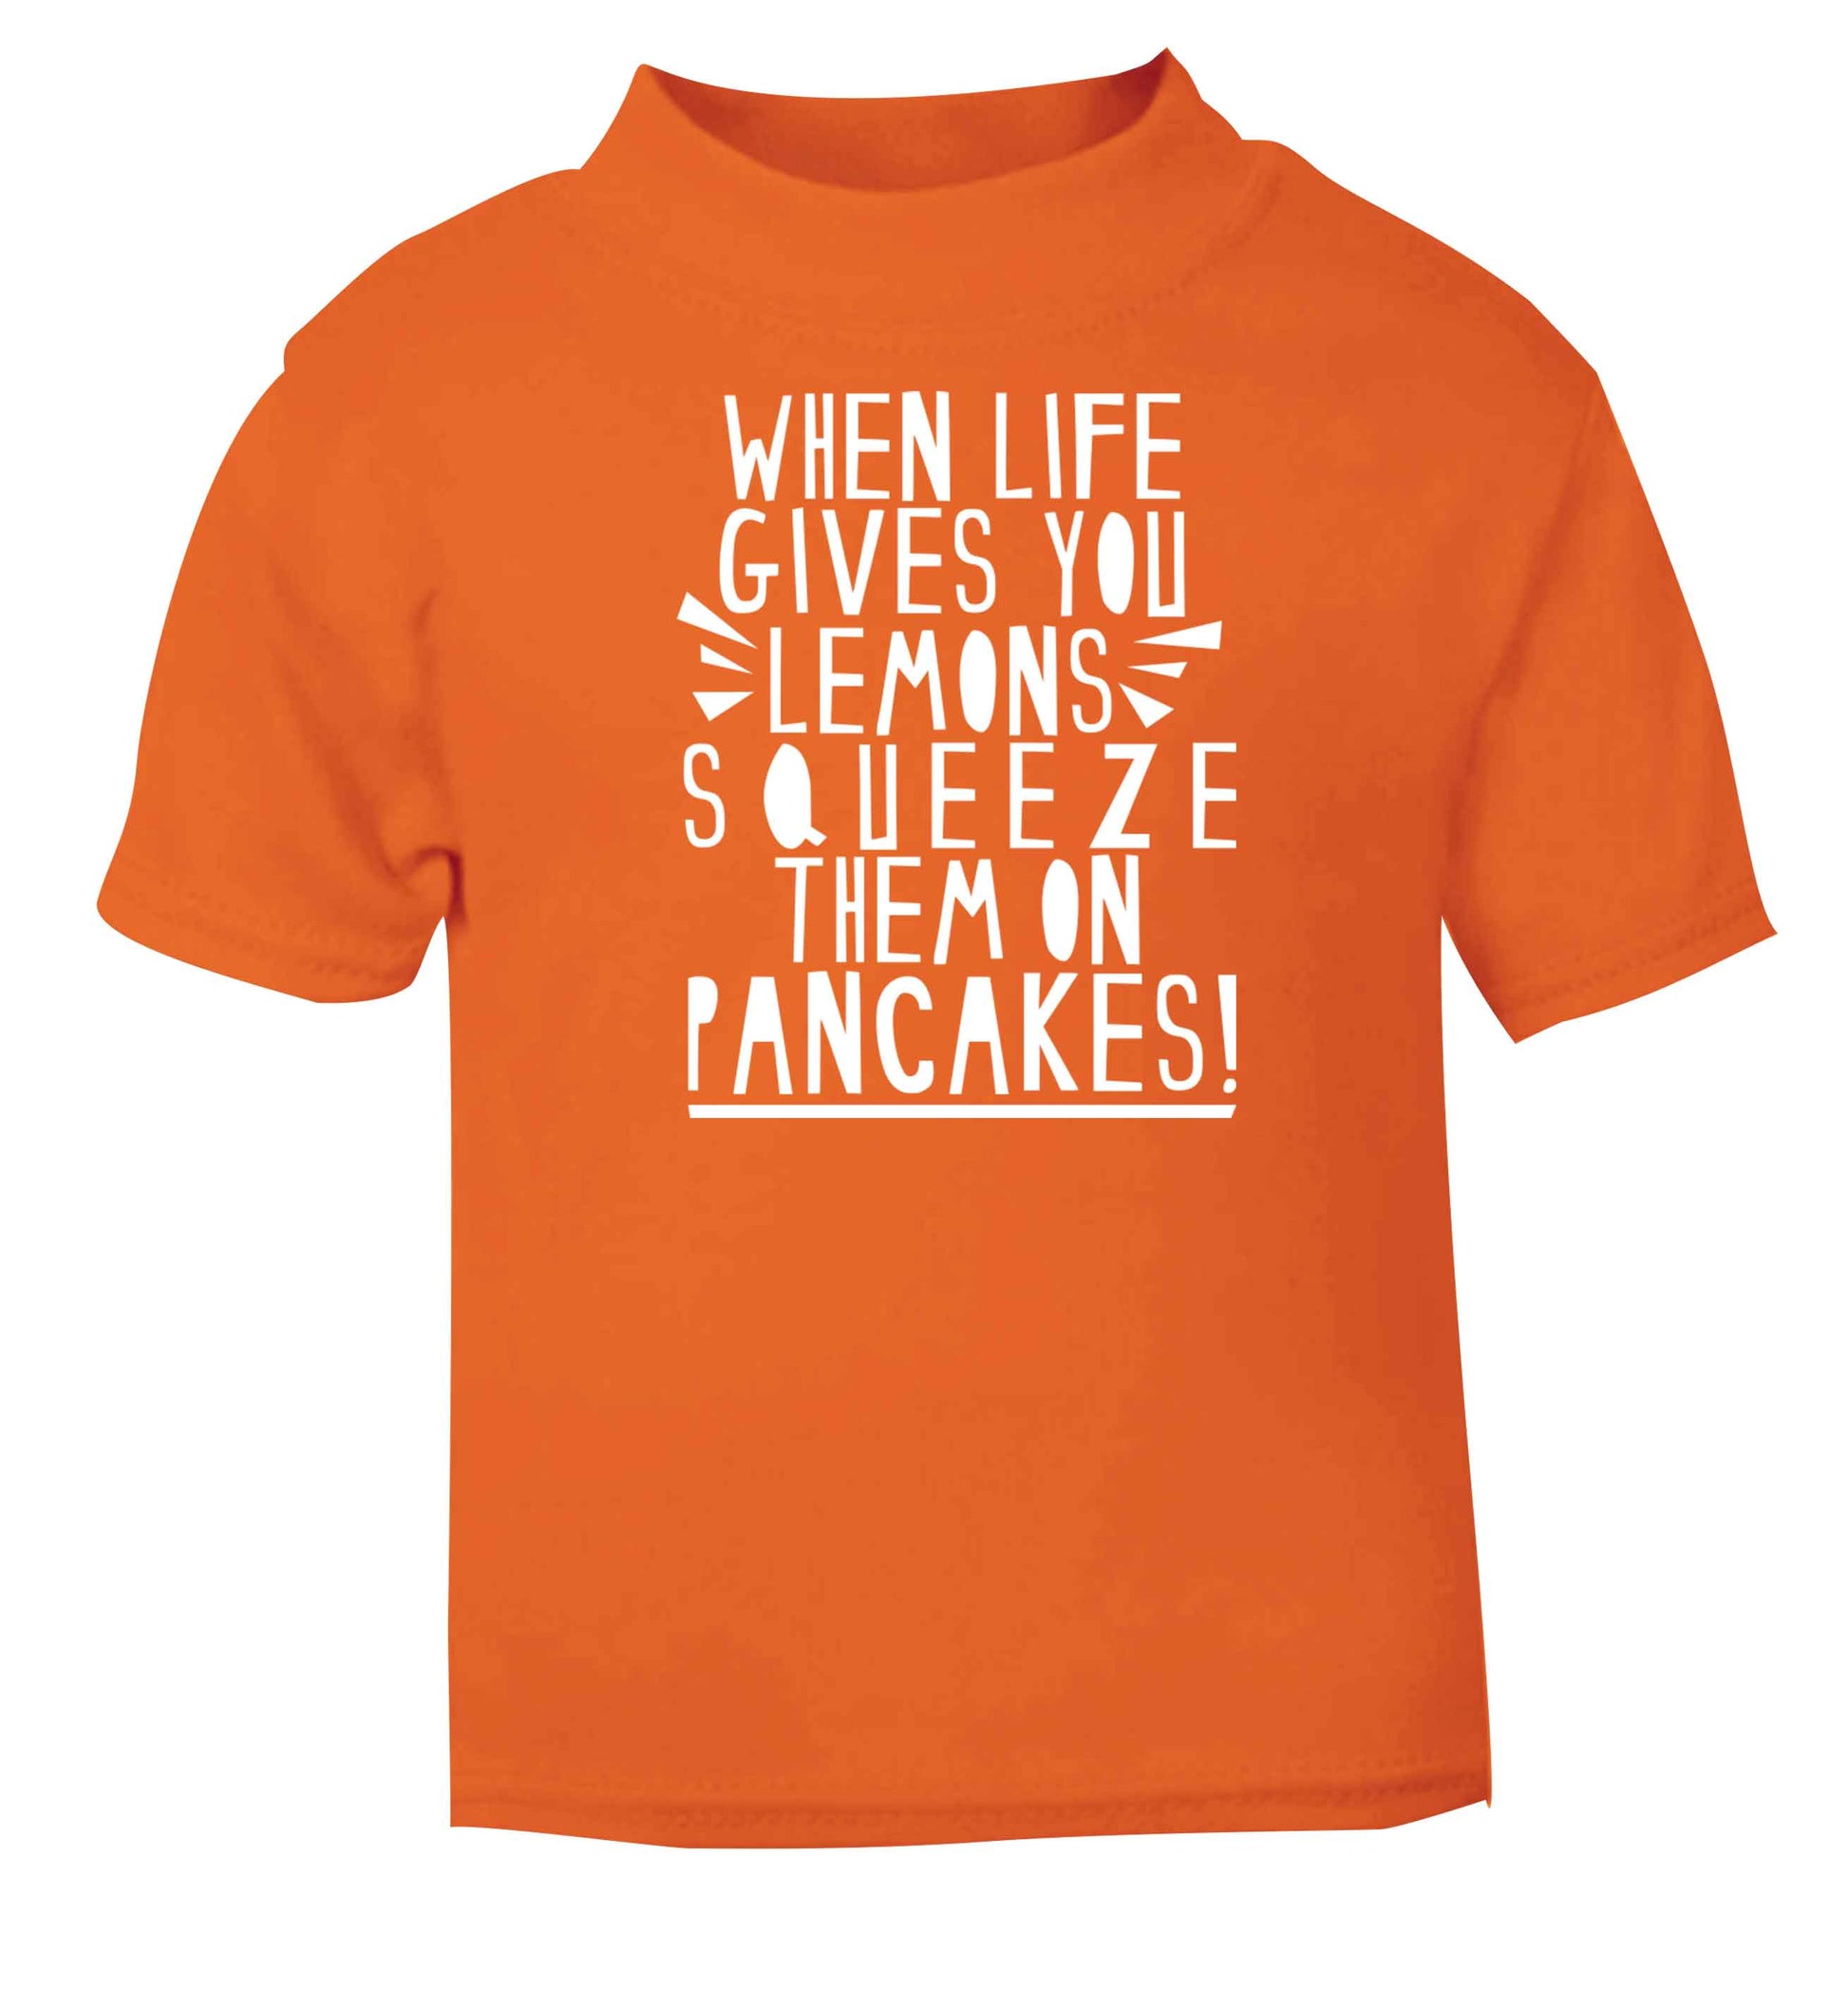 When life gives you lemons squeeze them on pancakes! orange baby toddler Tshirt 2 Years